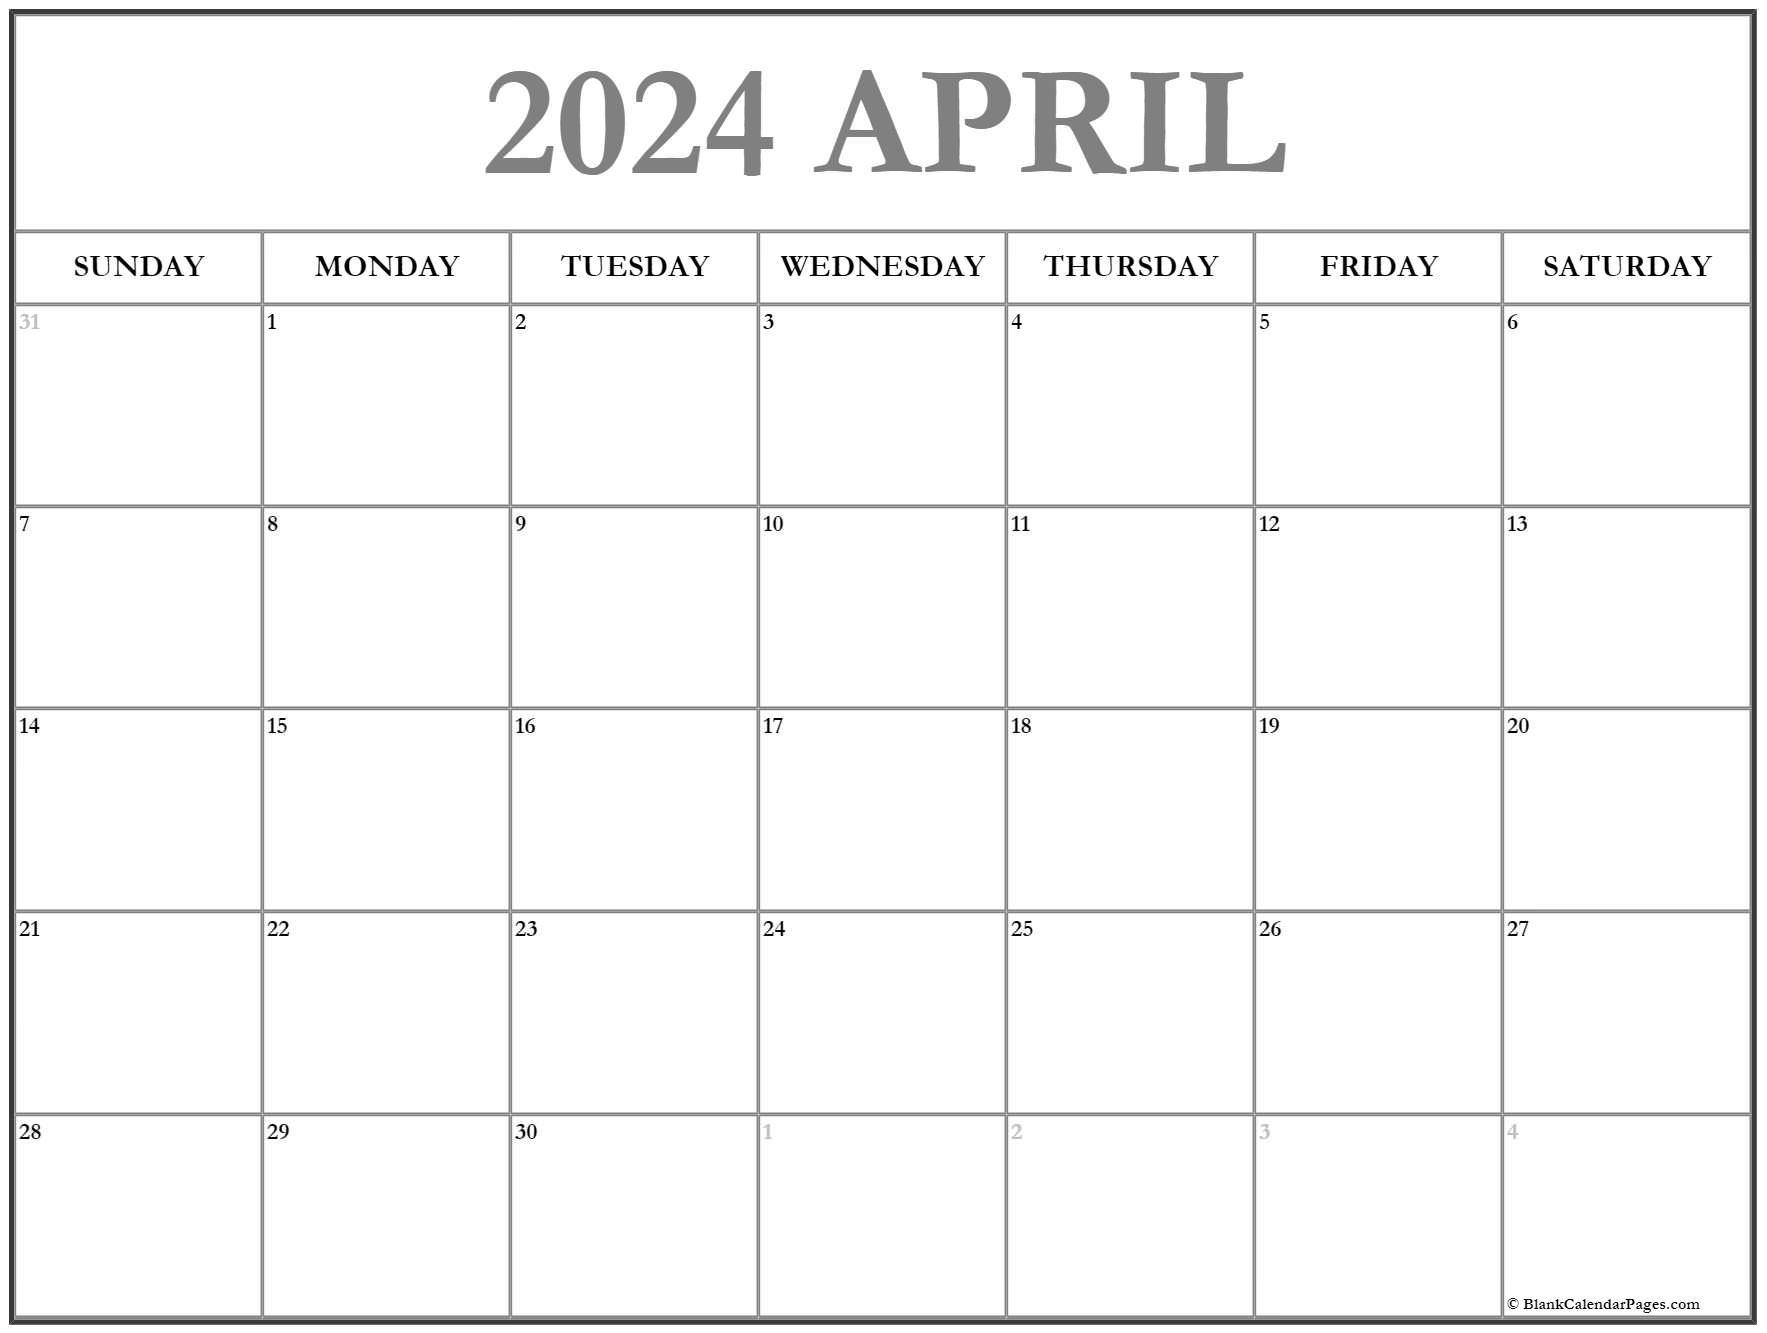 free-april-2024-calendar-to-print-online-holly-laureen